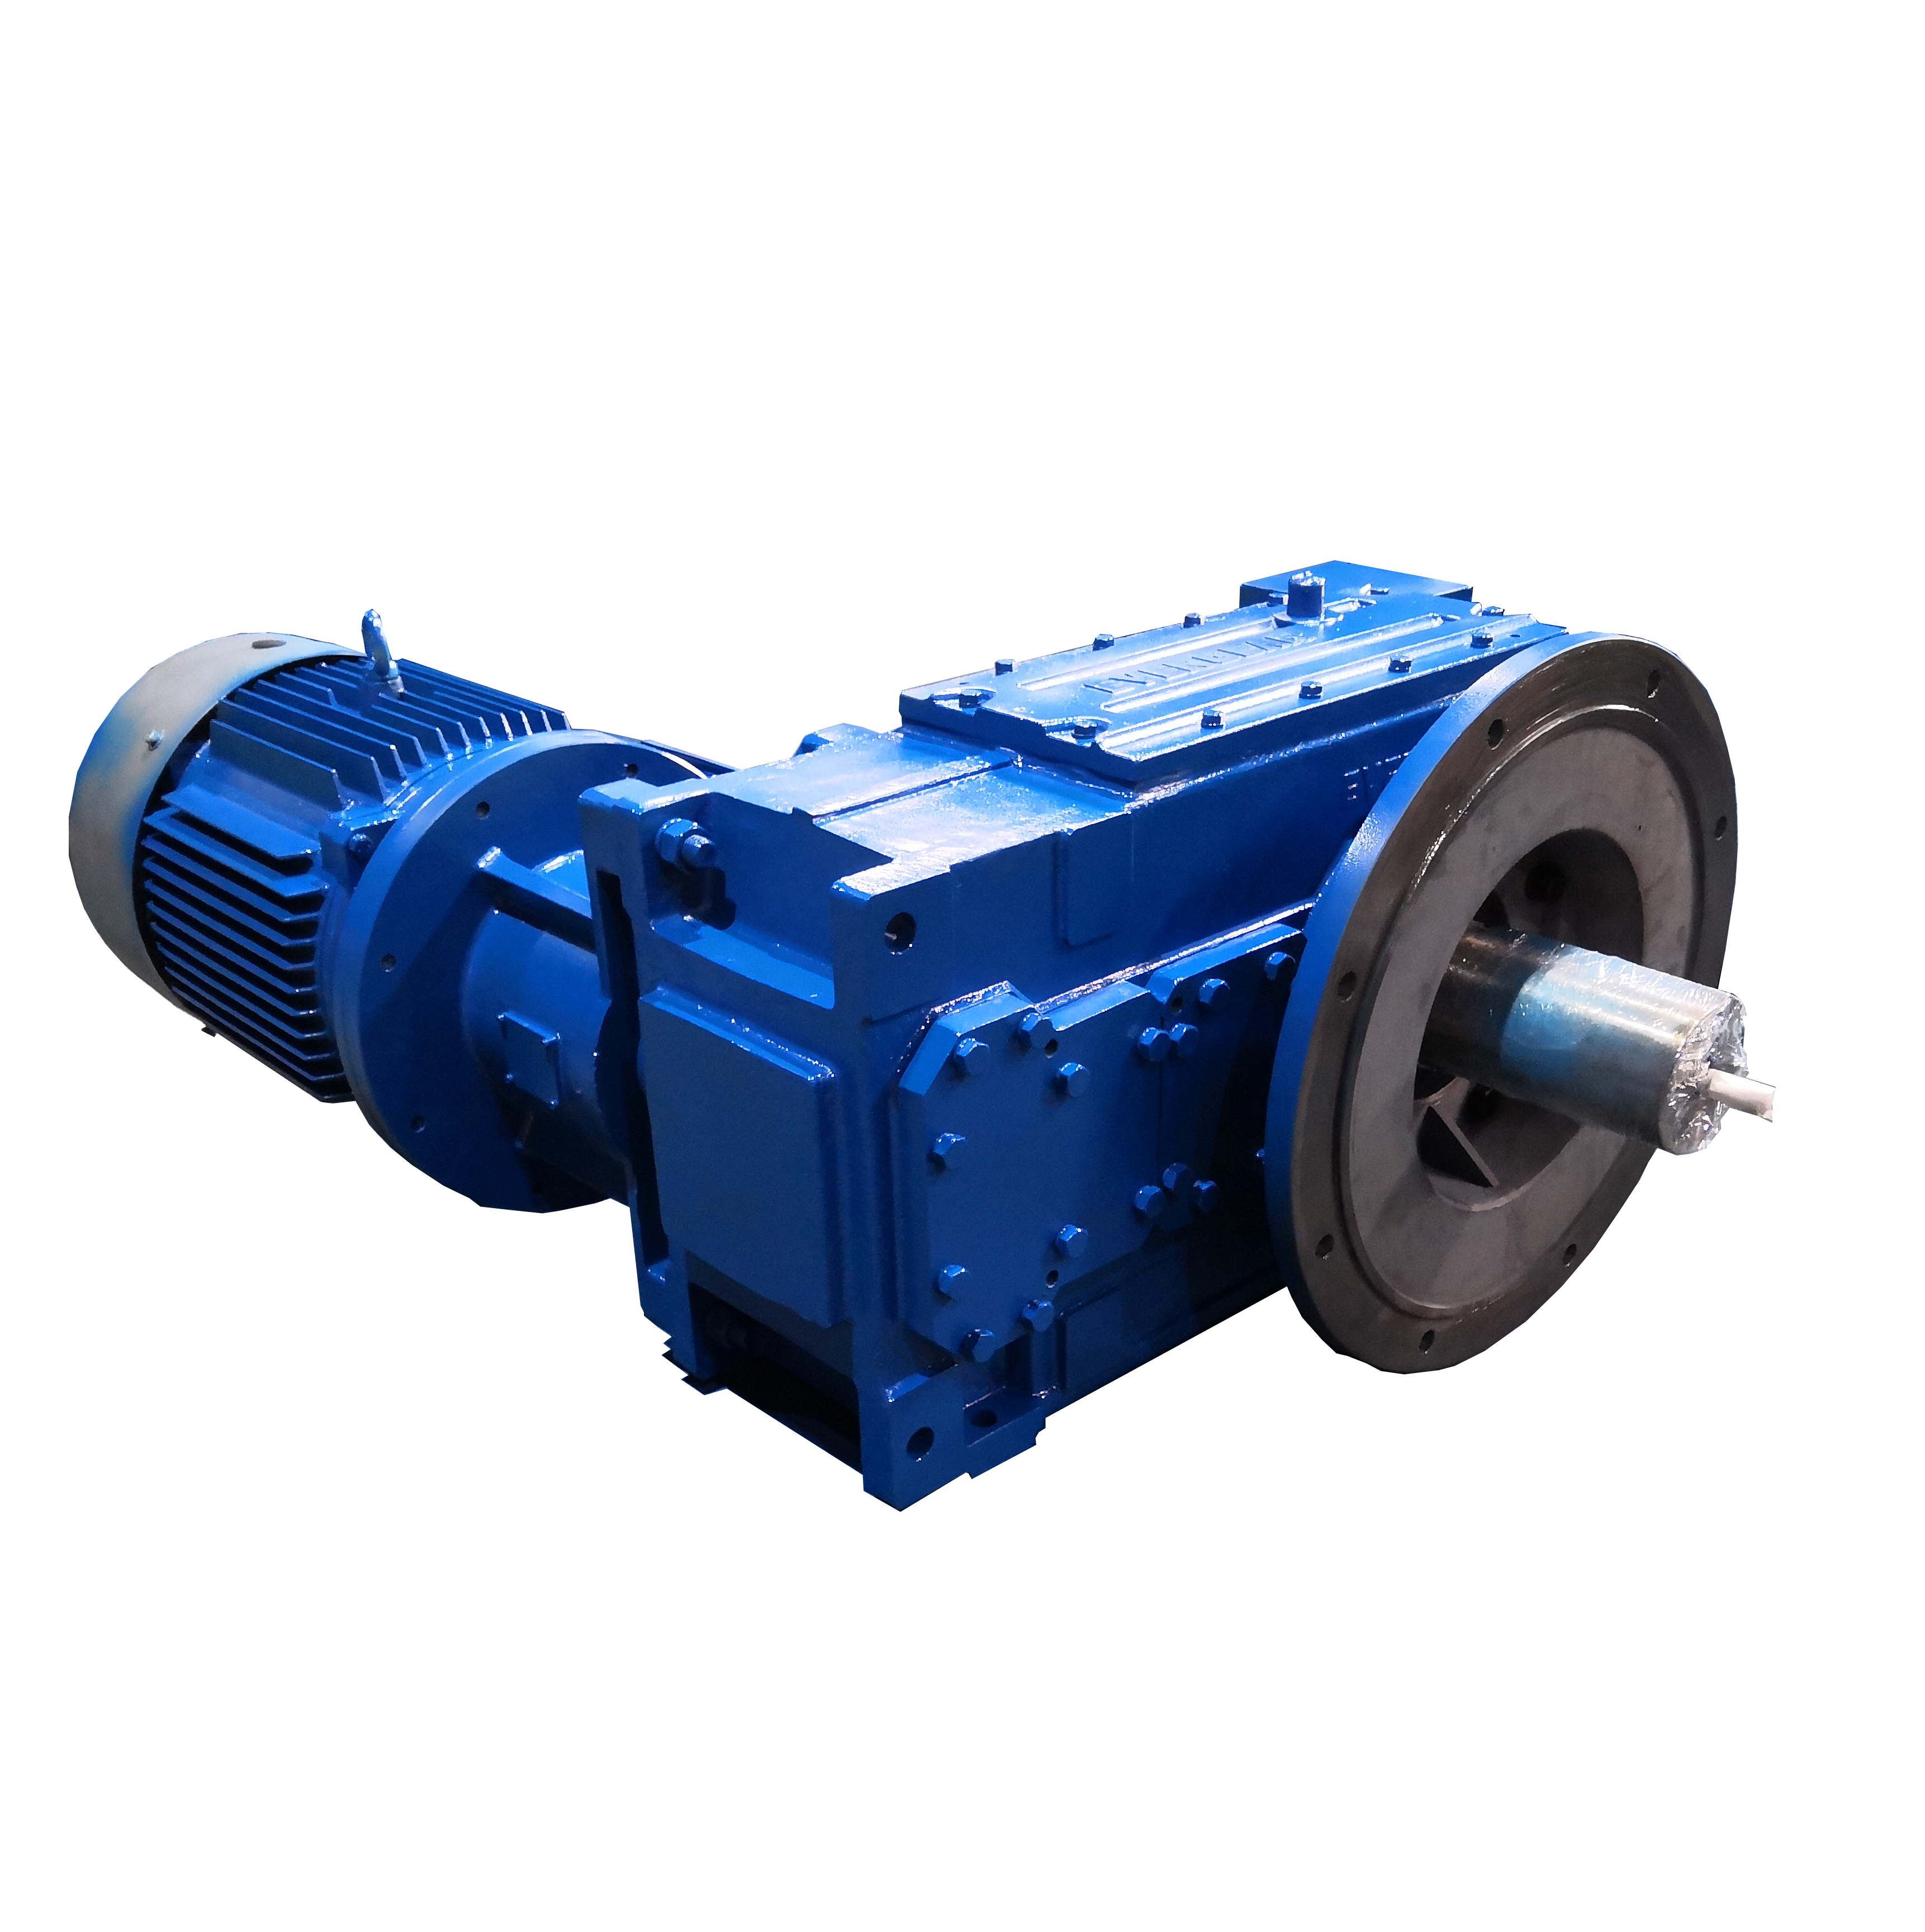 EVERGEAR H/B Series mechanical gearbox for low input to heavy output helic reduction gears